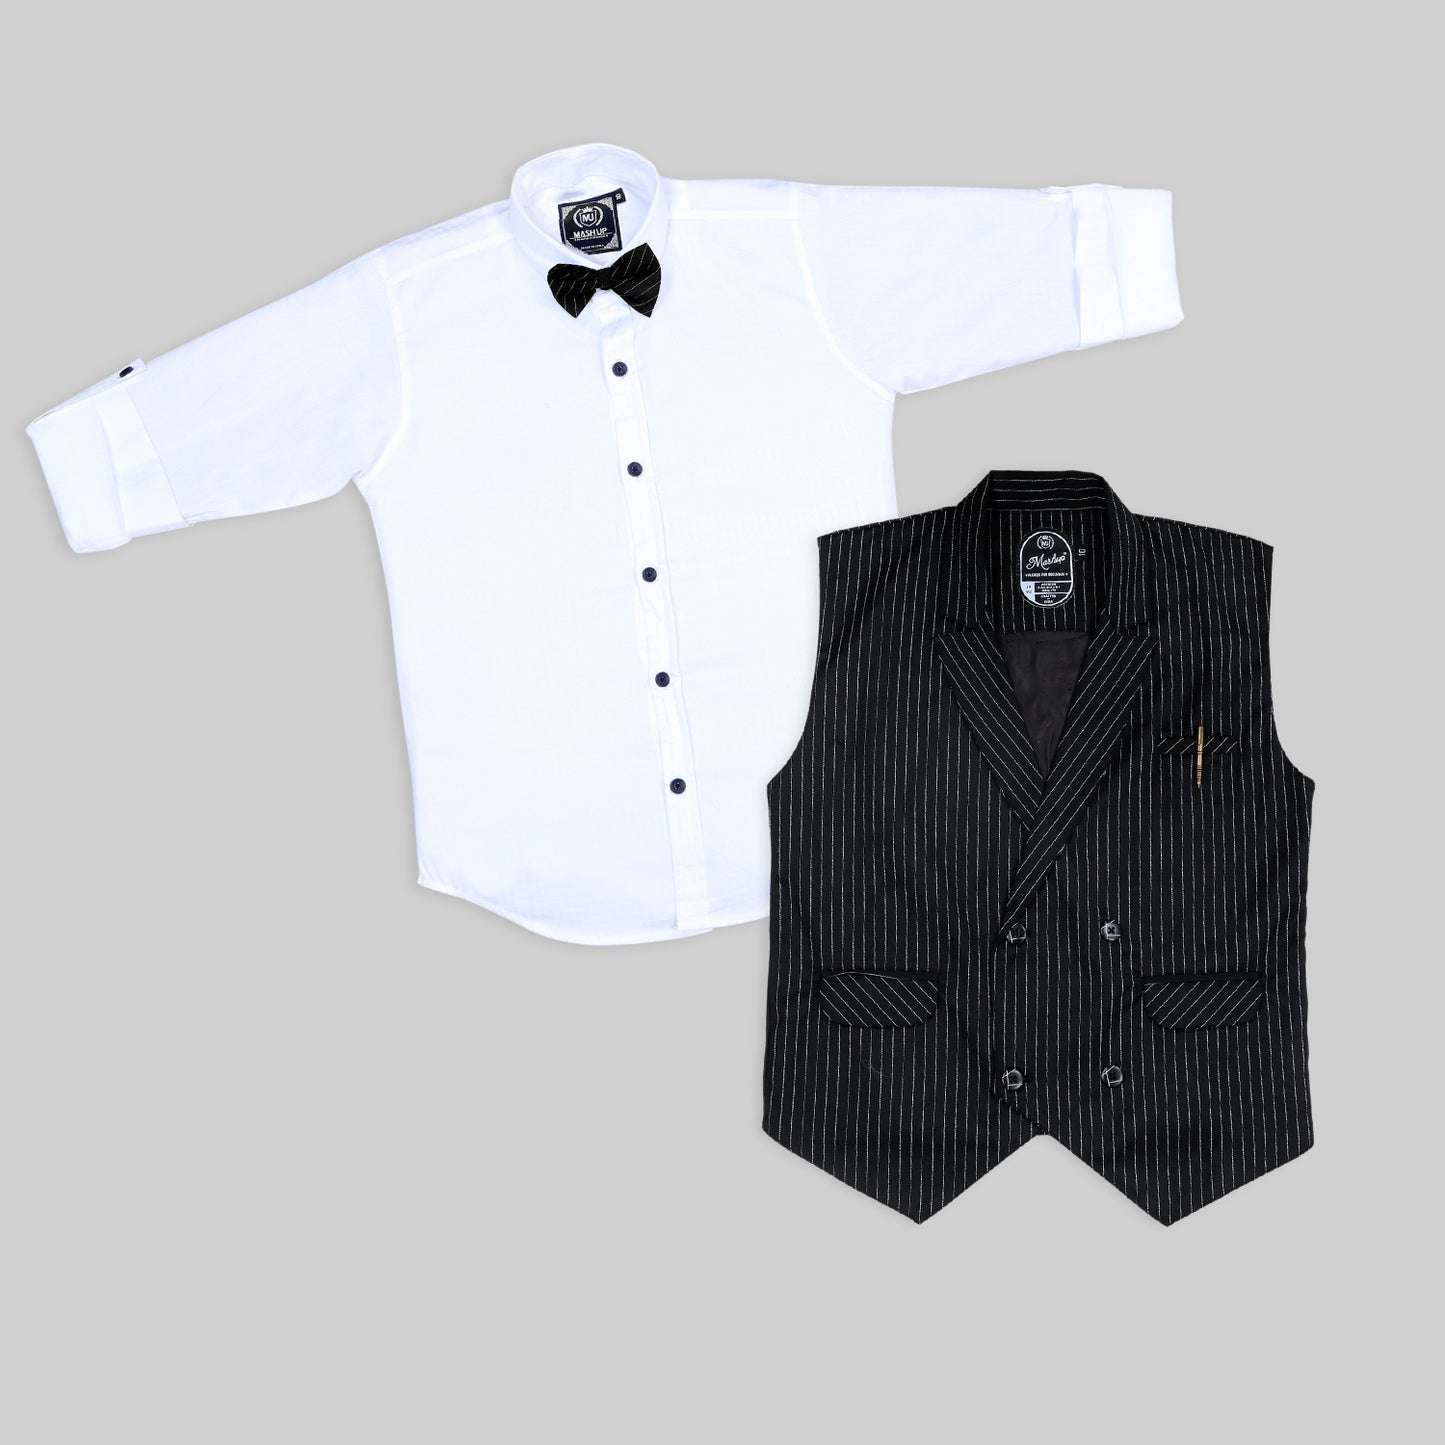 MashUp Stylish formal party shirt with waistcoat and a tie